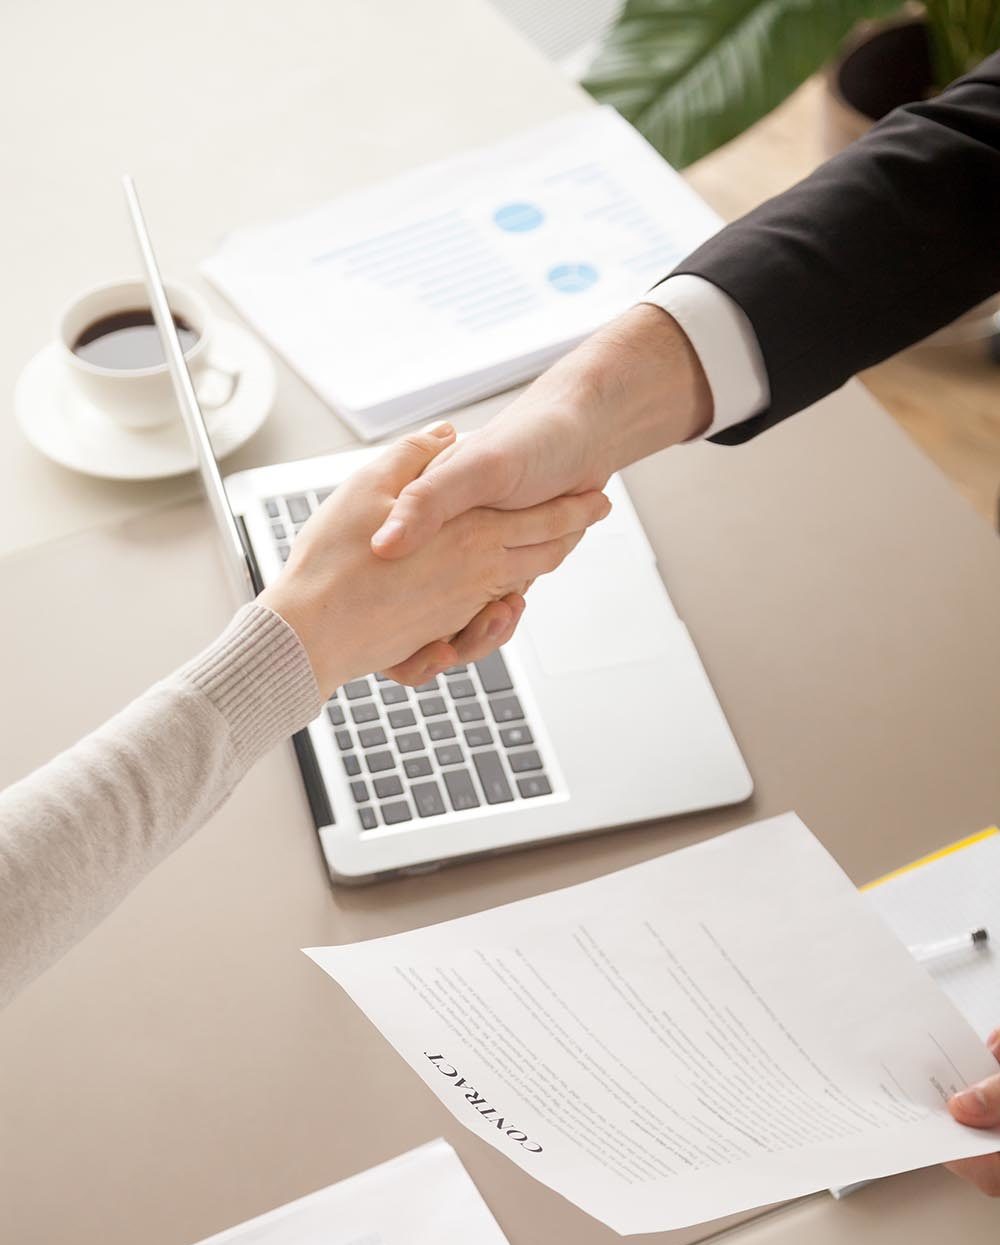 Man and woman shaking hands over an application document